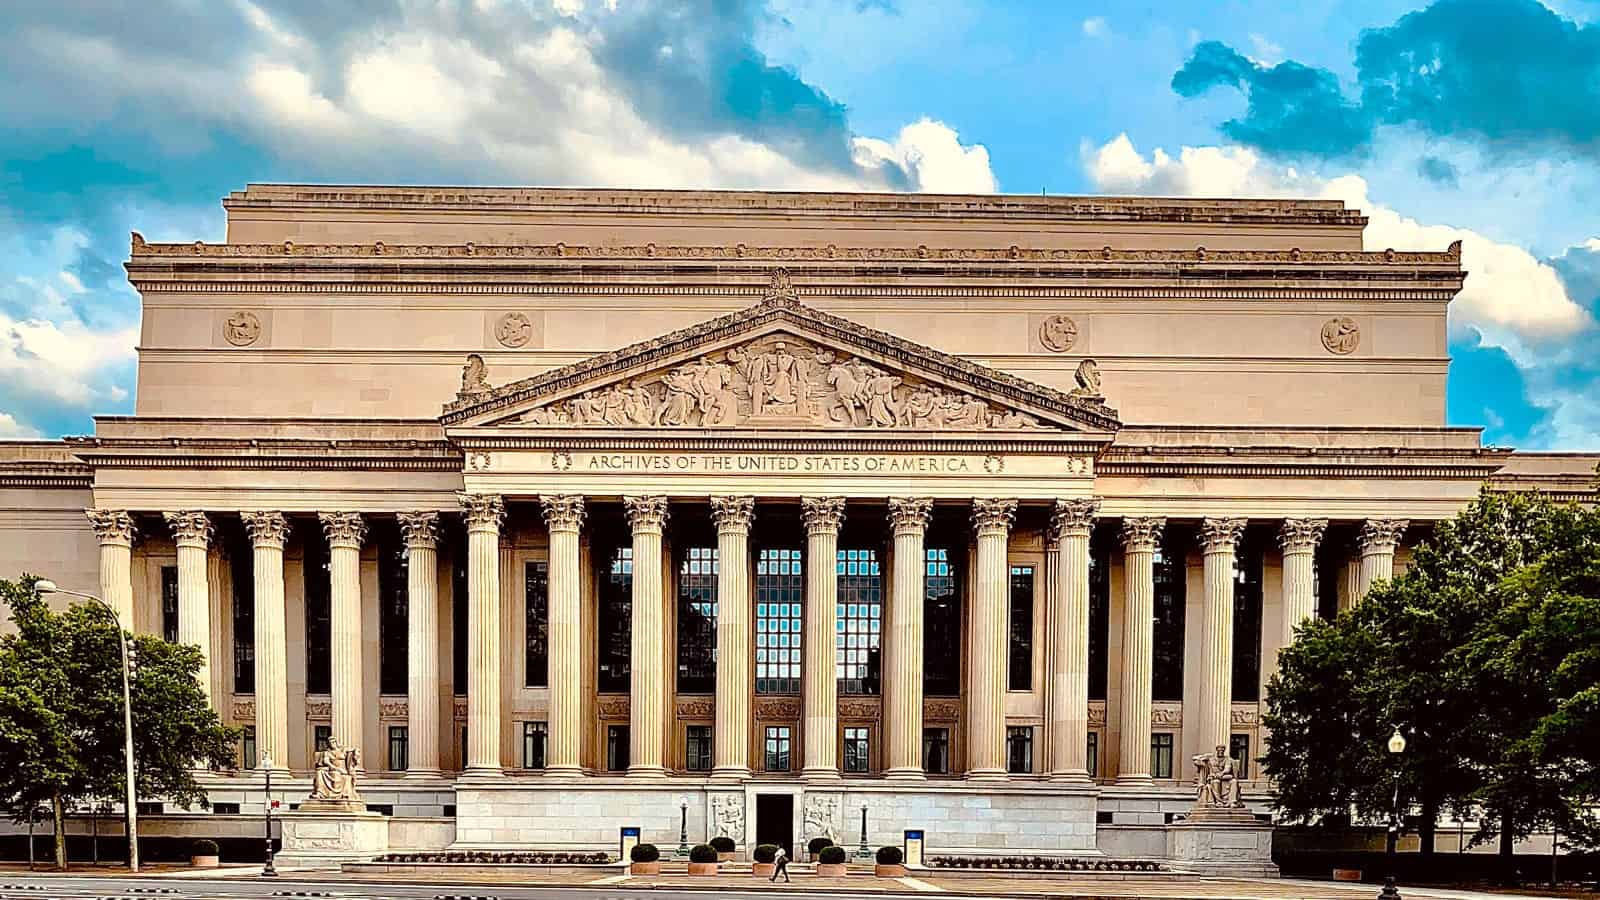 The National Archives Building